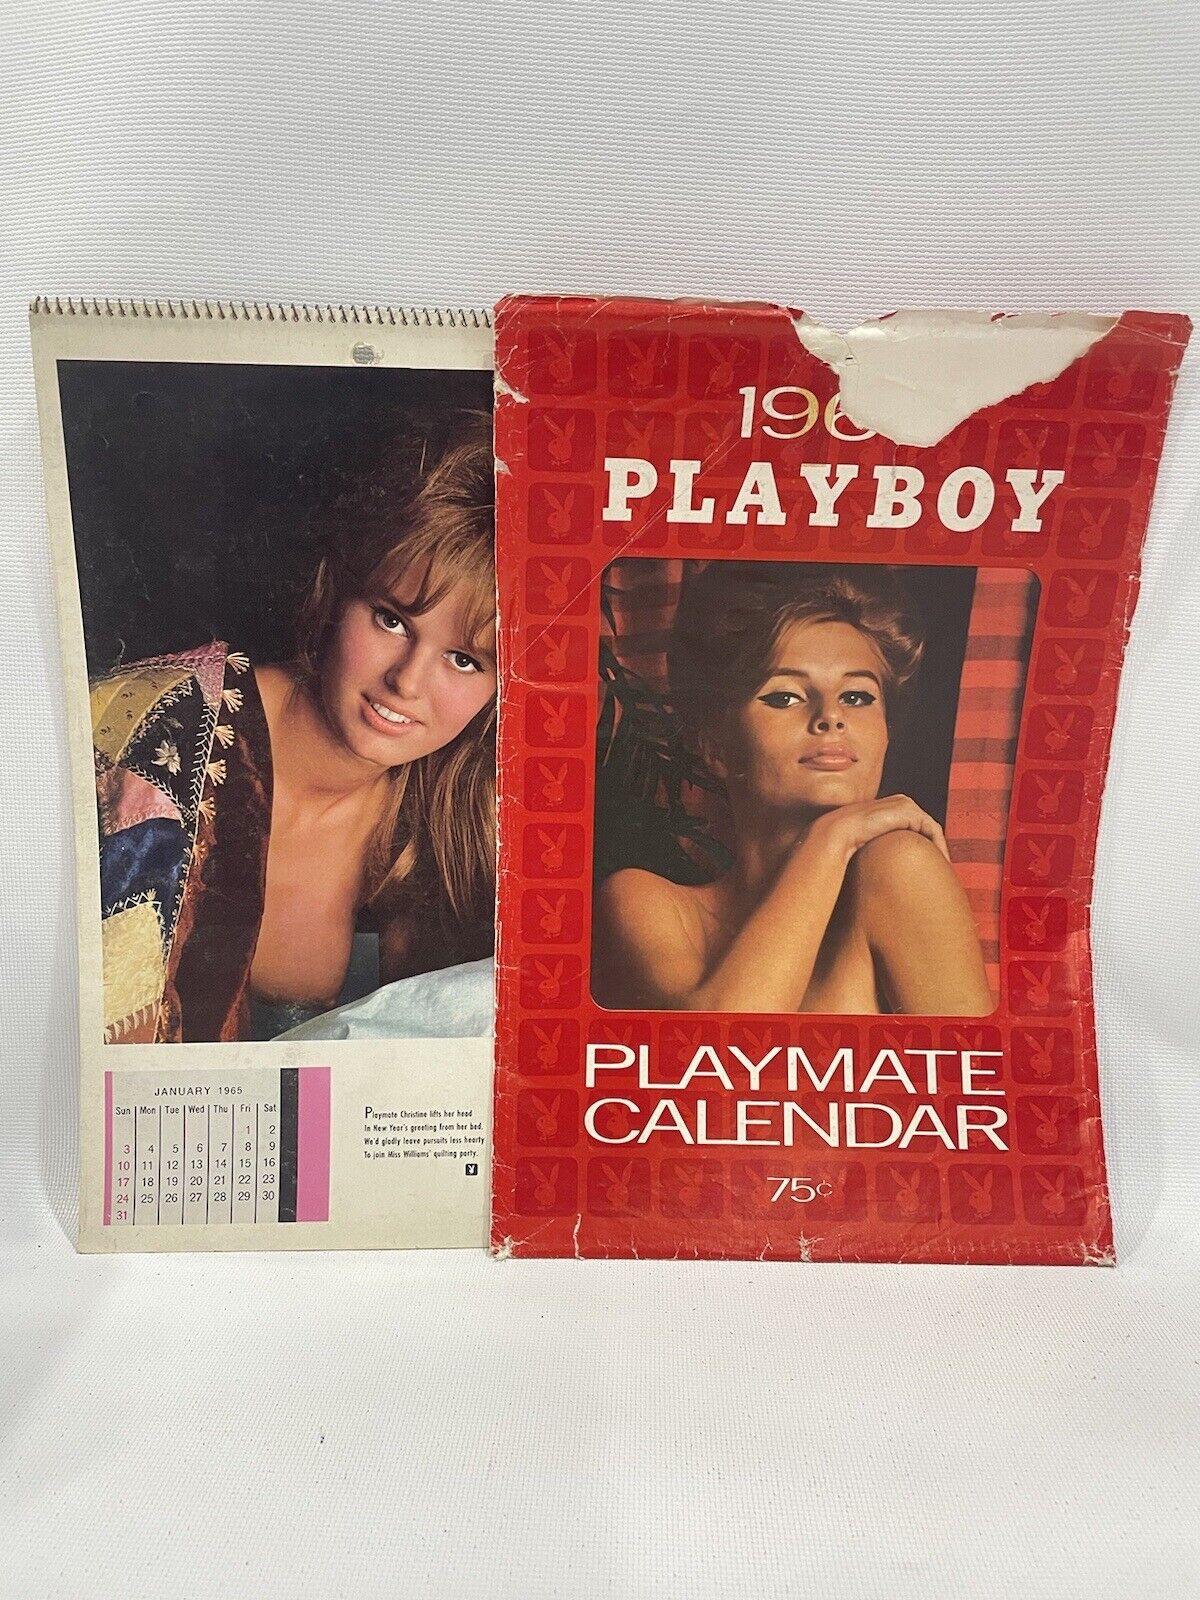 PLAYBOY 1965 Playmate Wall Calendar in Original Envelope Moderate Condition